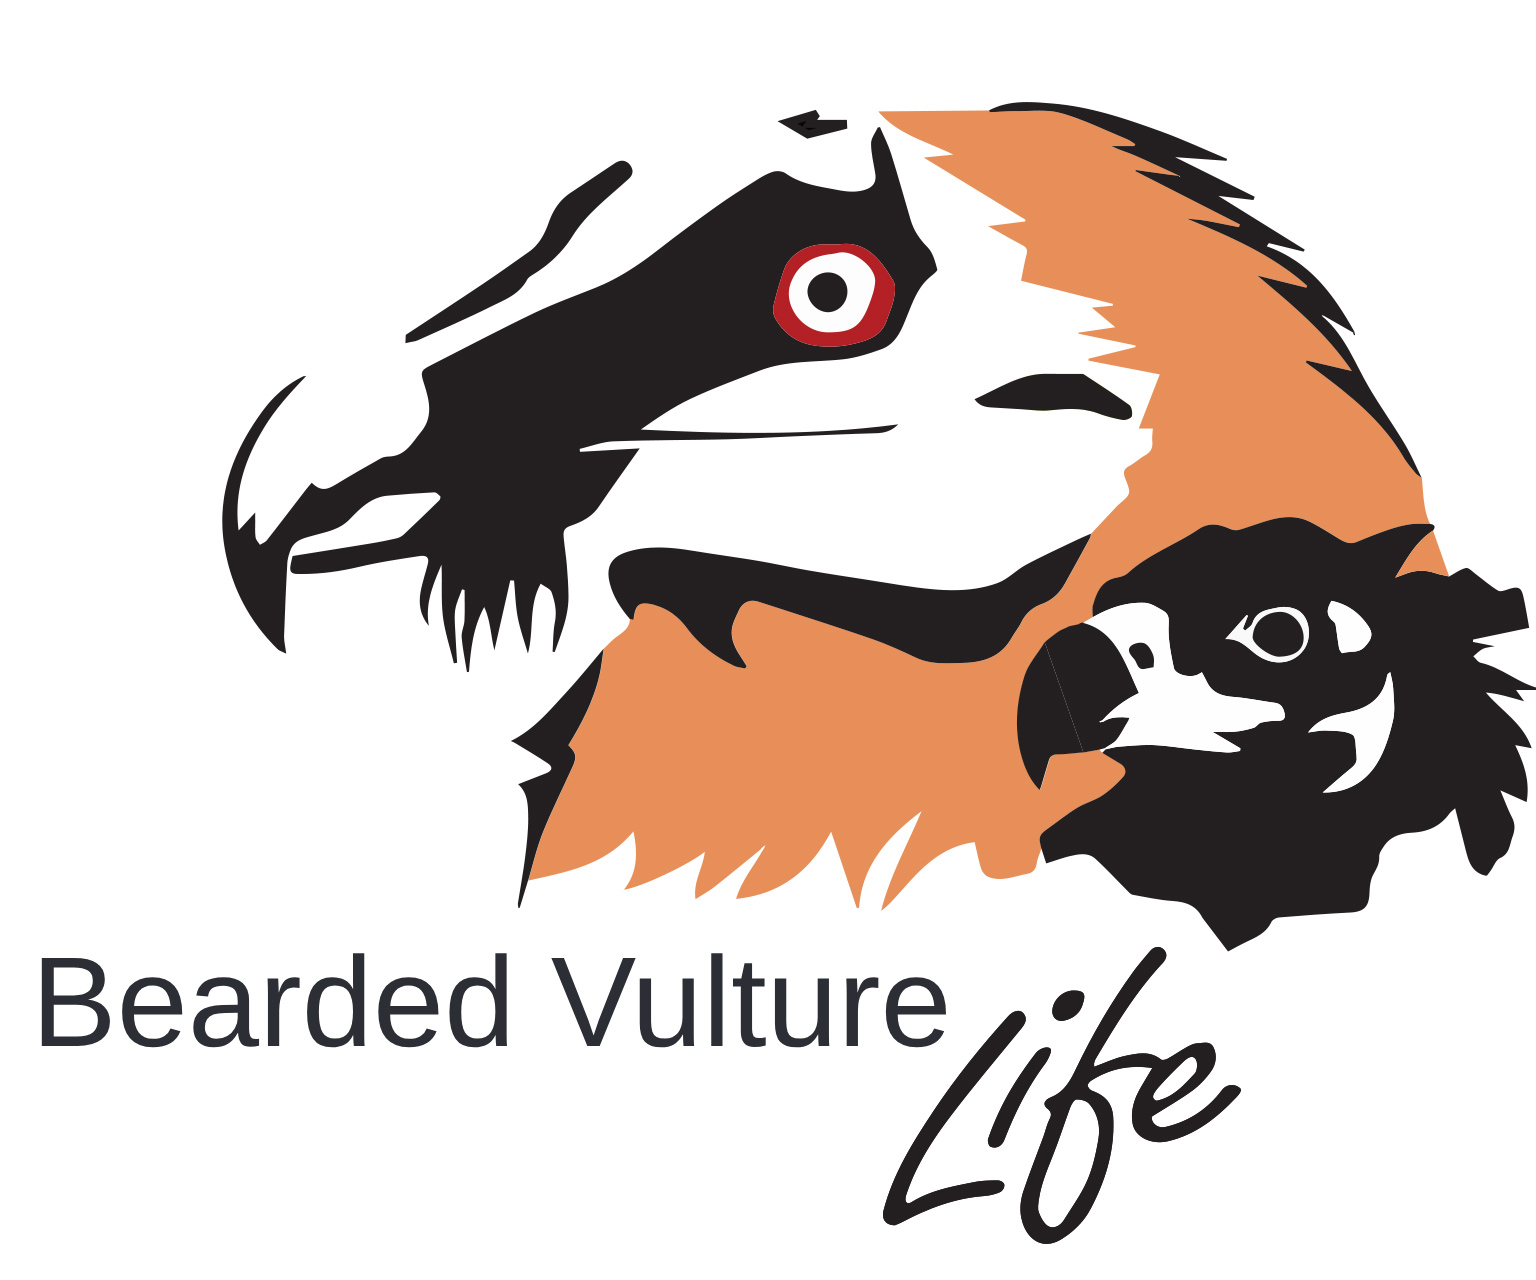 Bearded Vulture LIFE - project logo